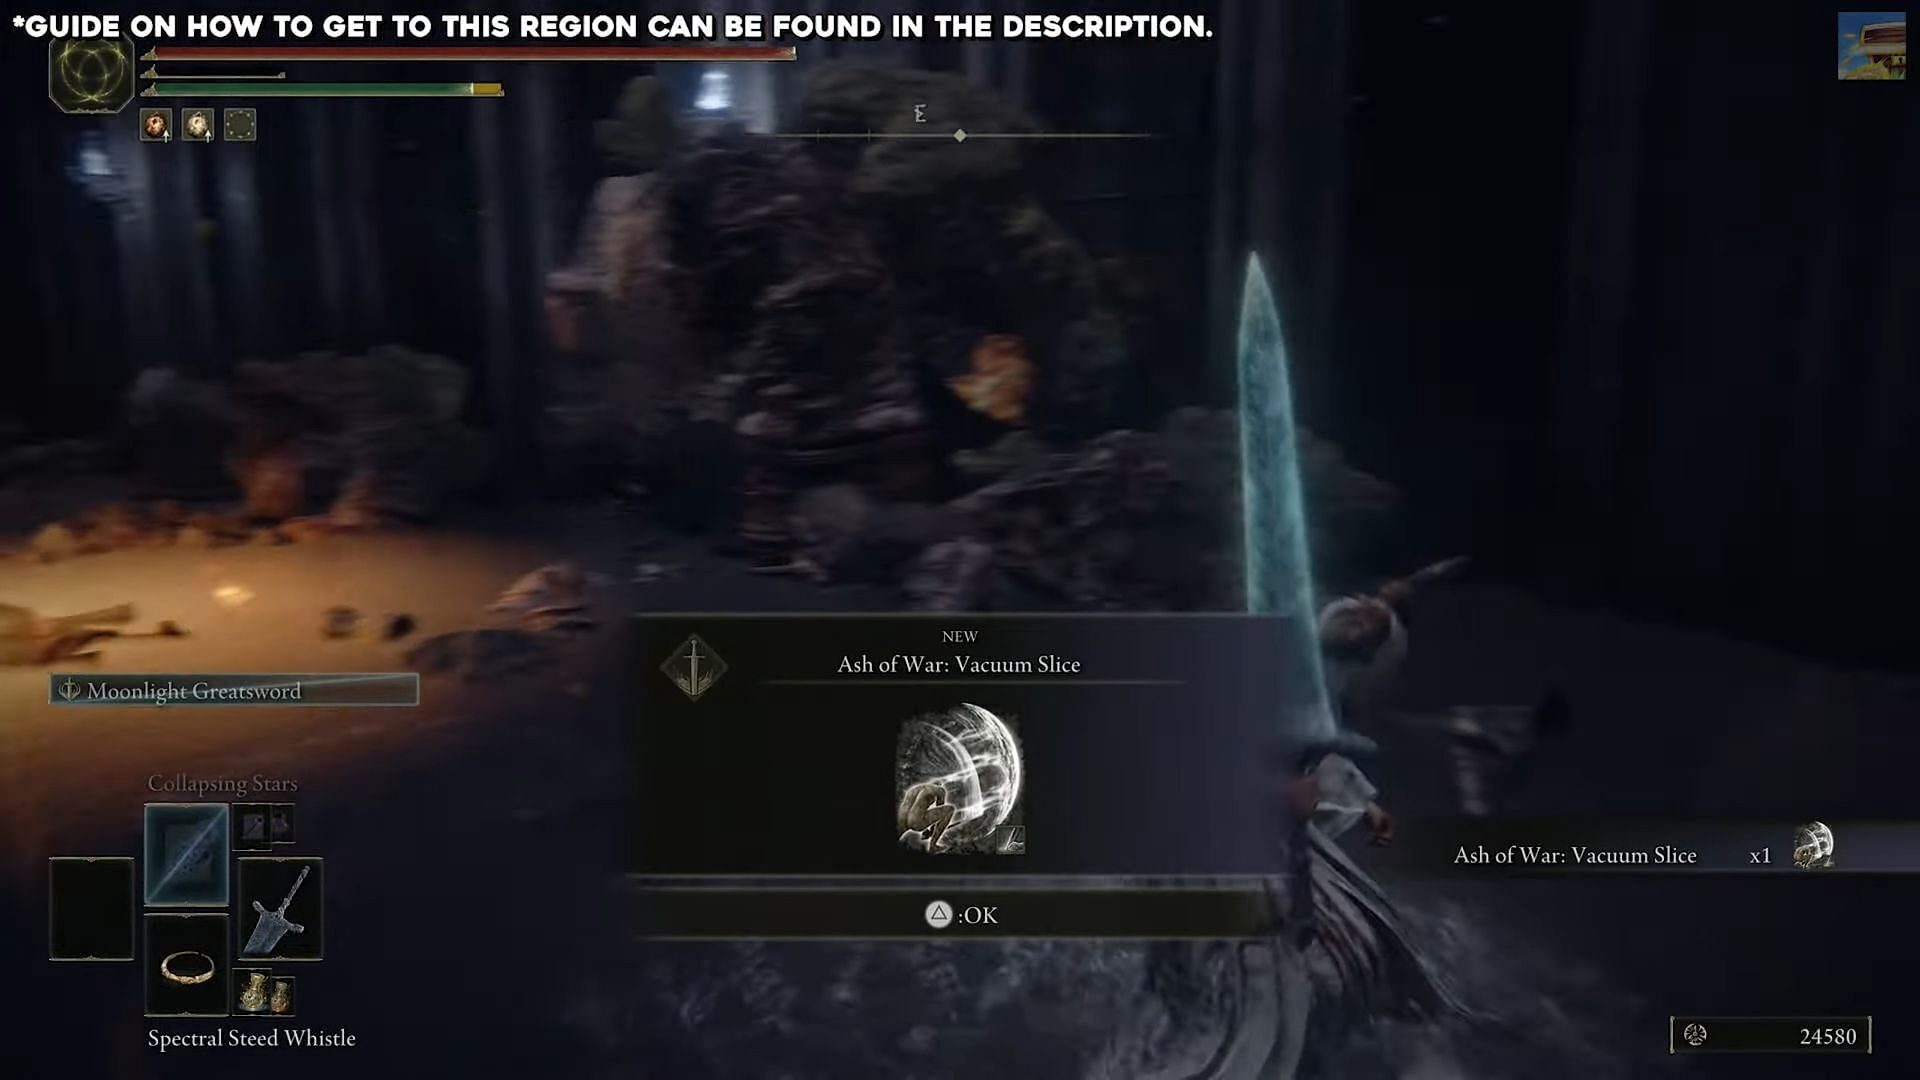 Vaccum Slice allows players to release an attack that cuts through enemies in Elden Ring (Image via 100% Guides/Youtube)